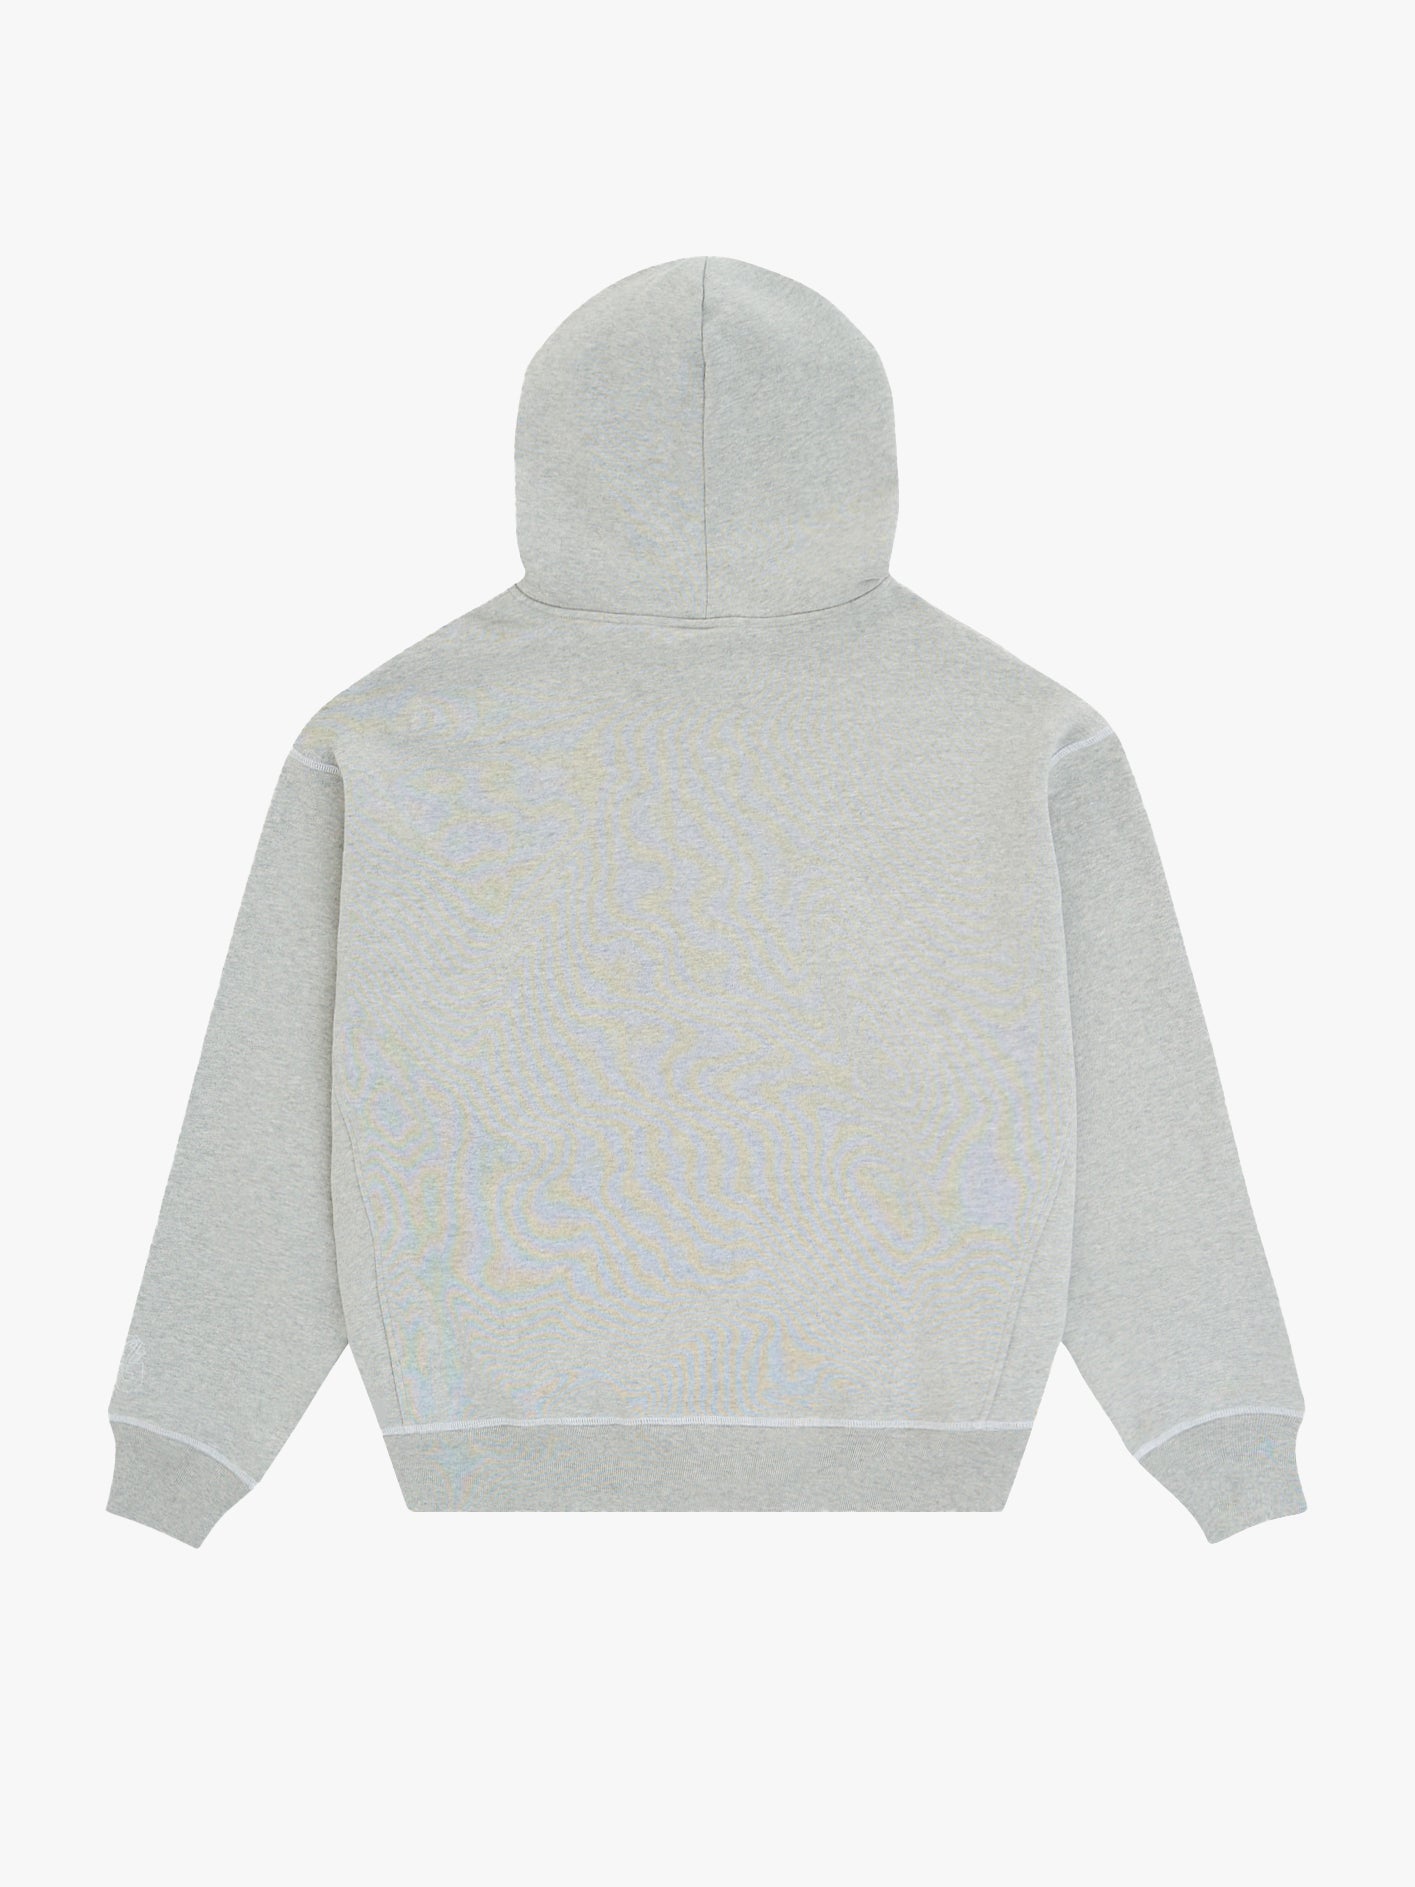 EXPRESS YOURSELF HOODIE - GREY